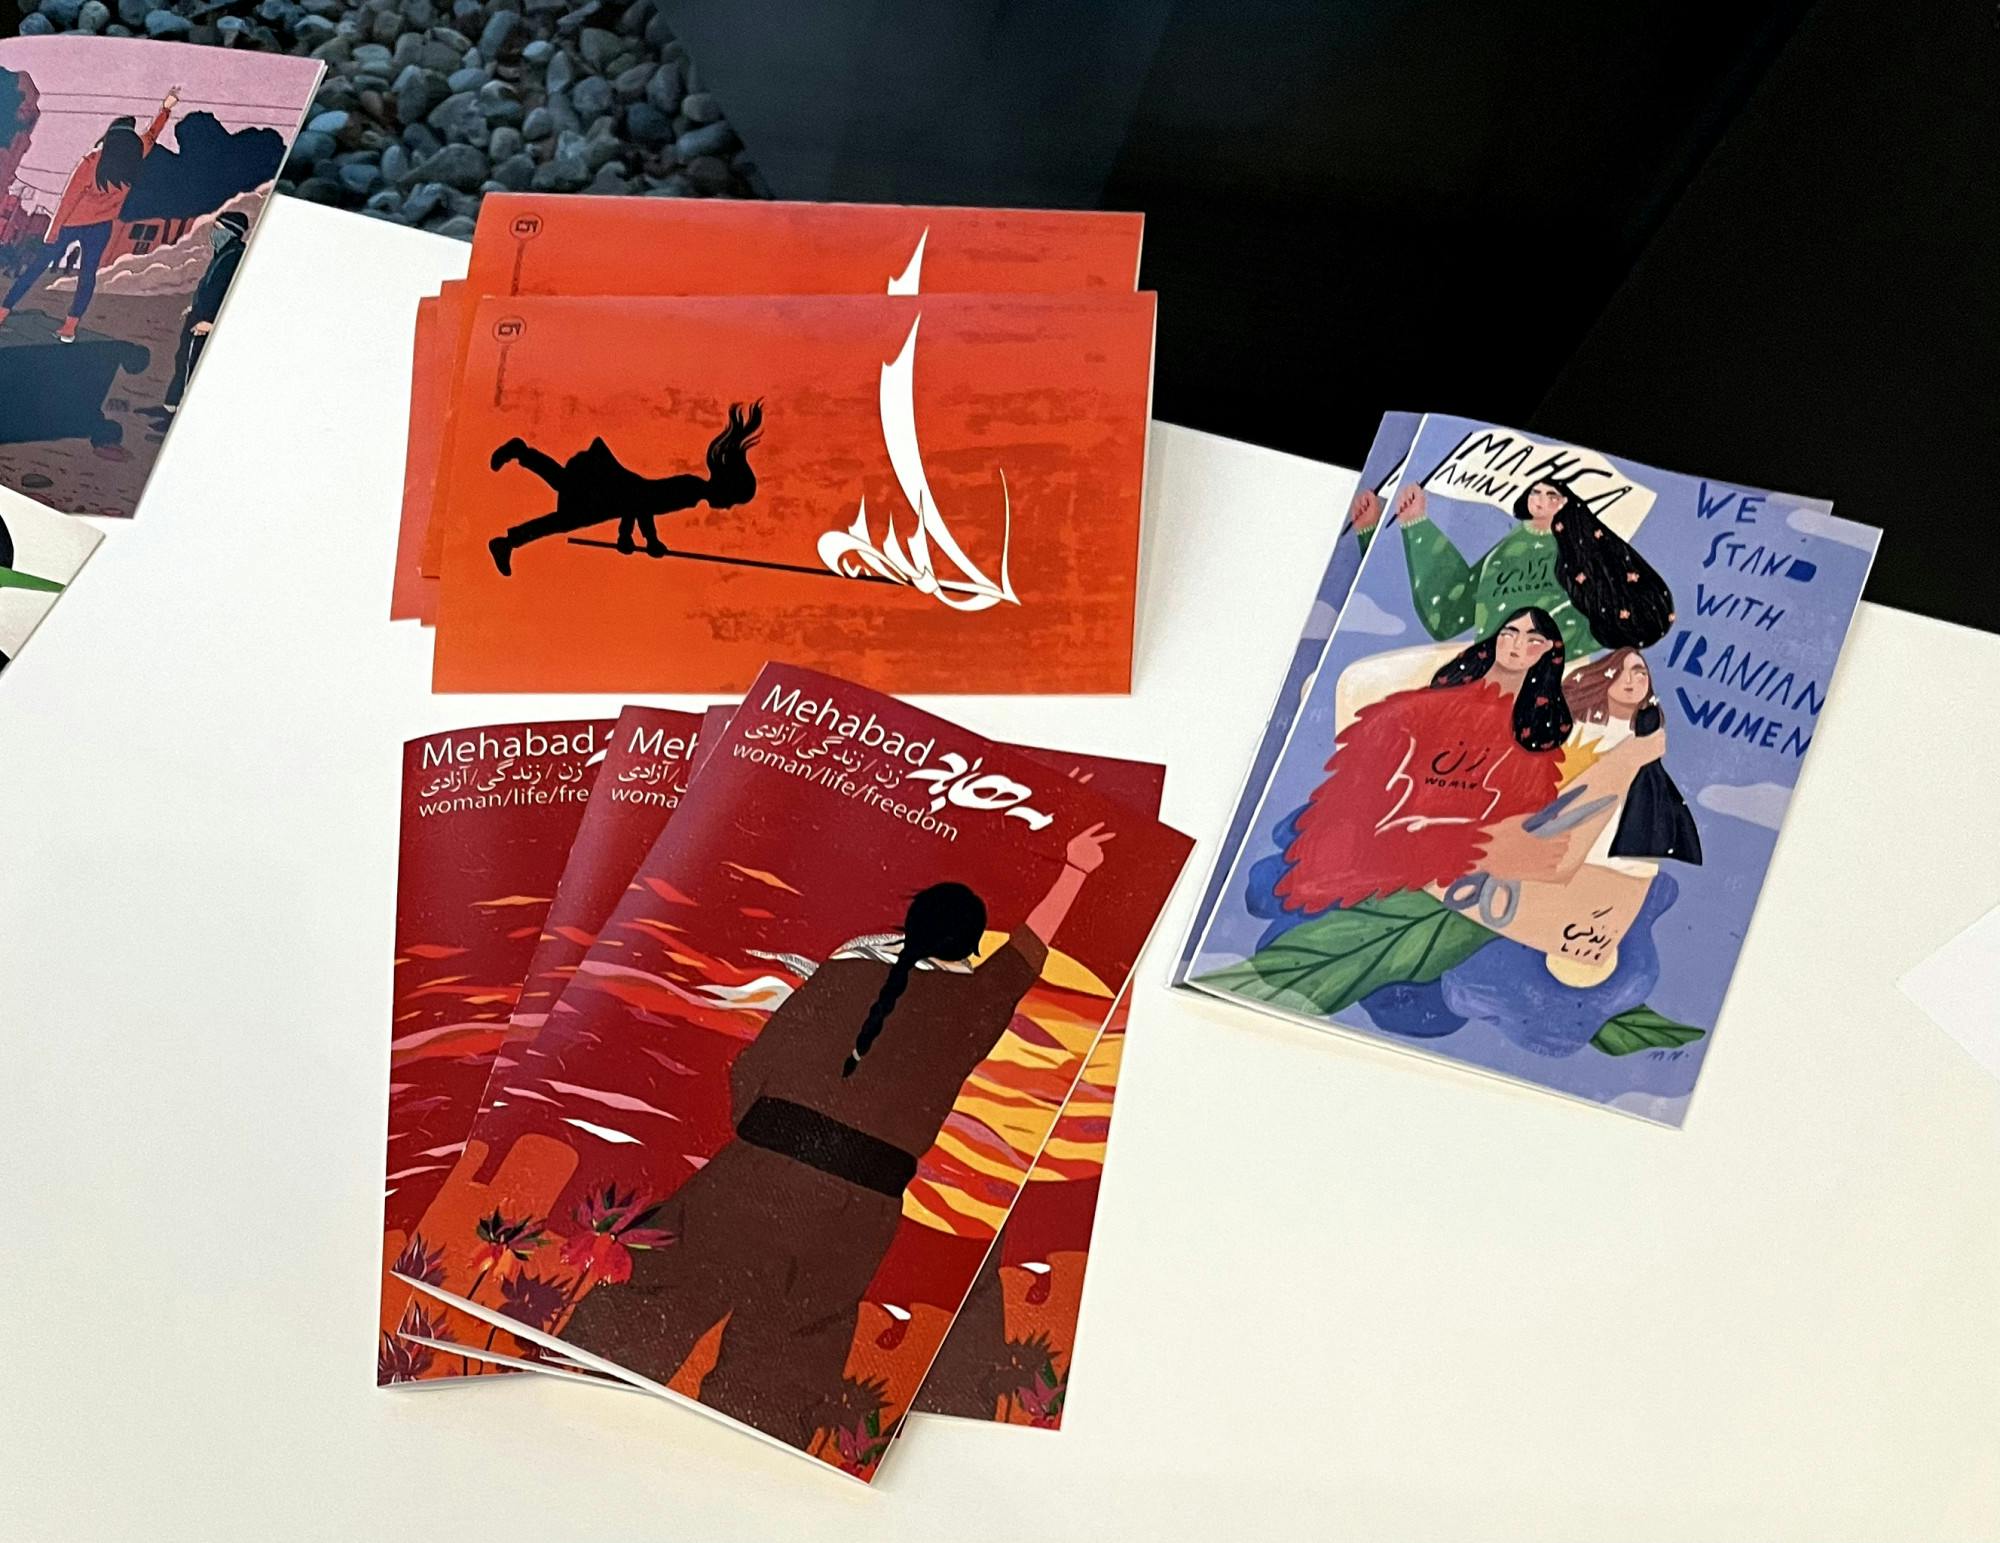 <p><span style="background-color: rgb(248, 248, 248); color: rgb(29, 28, 29);">Programs from the "Woman Life Freedom" event at the Broad Art Museum. Each program cover was painted by Iranian artists, depicting struggle and solidarity in Iran. </span></p>